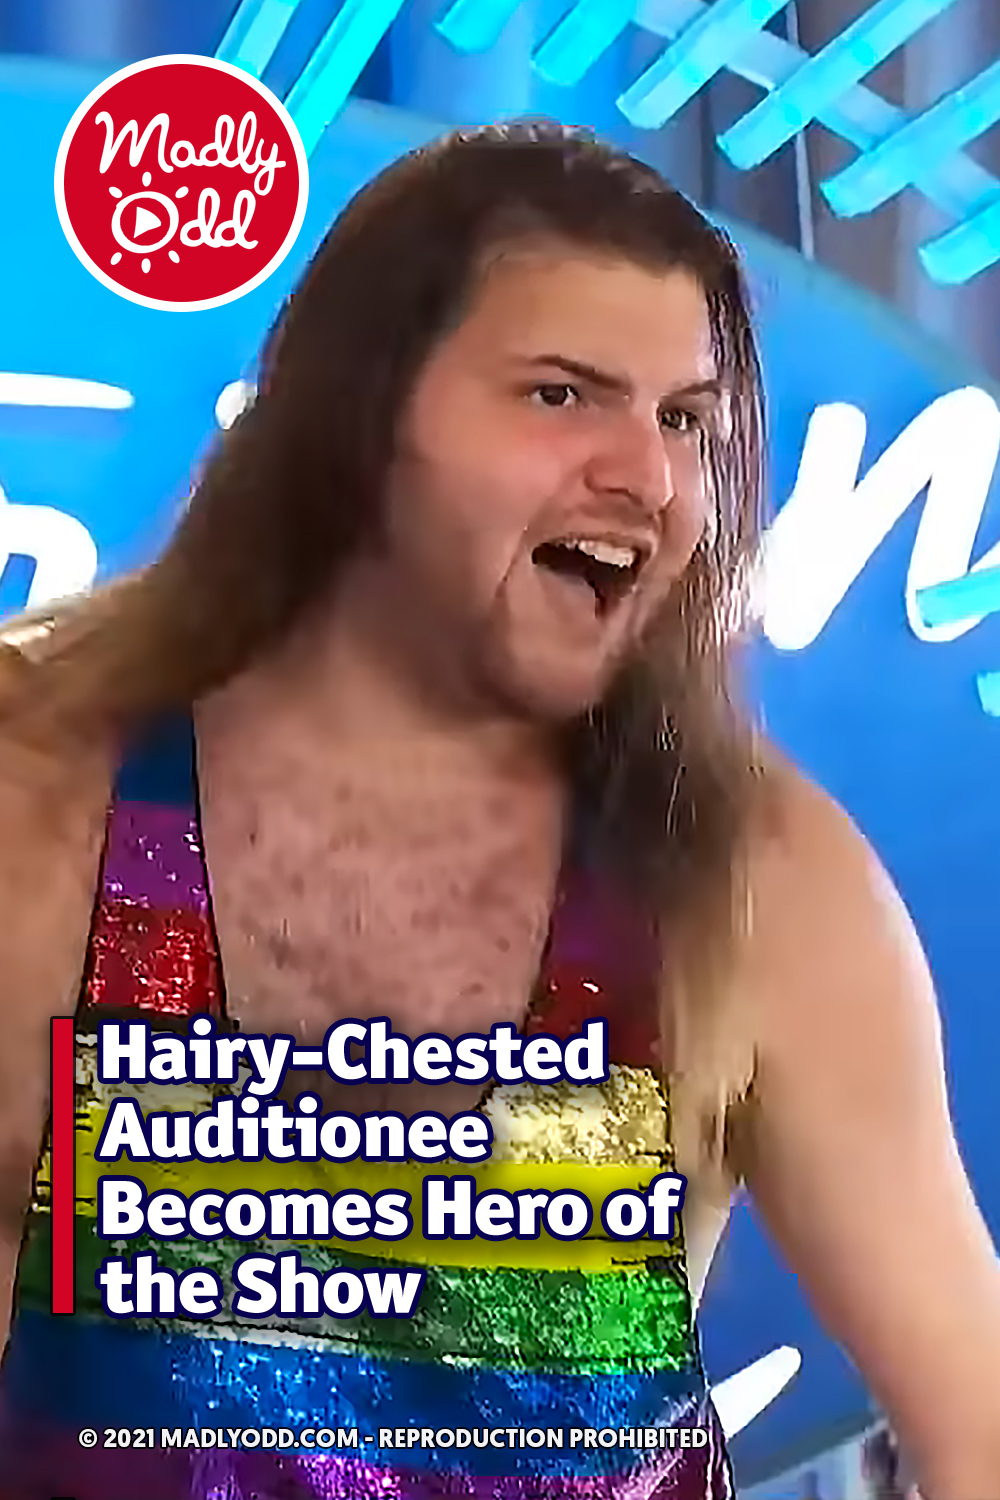 Hairy-Chested Auditionee Becomes Hero of the Show